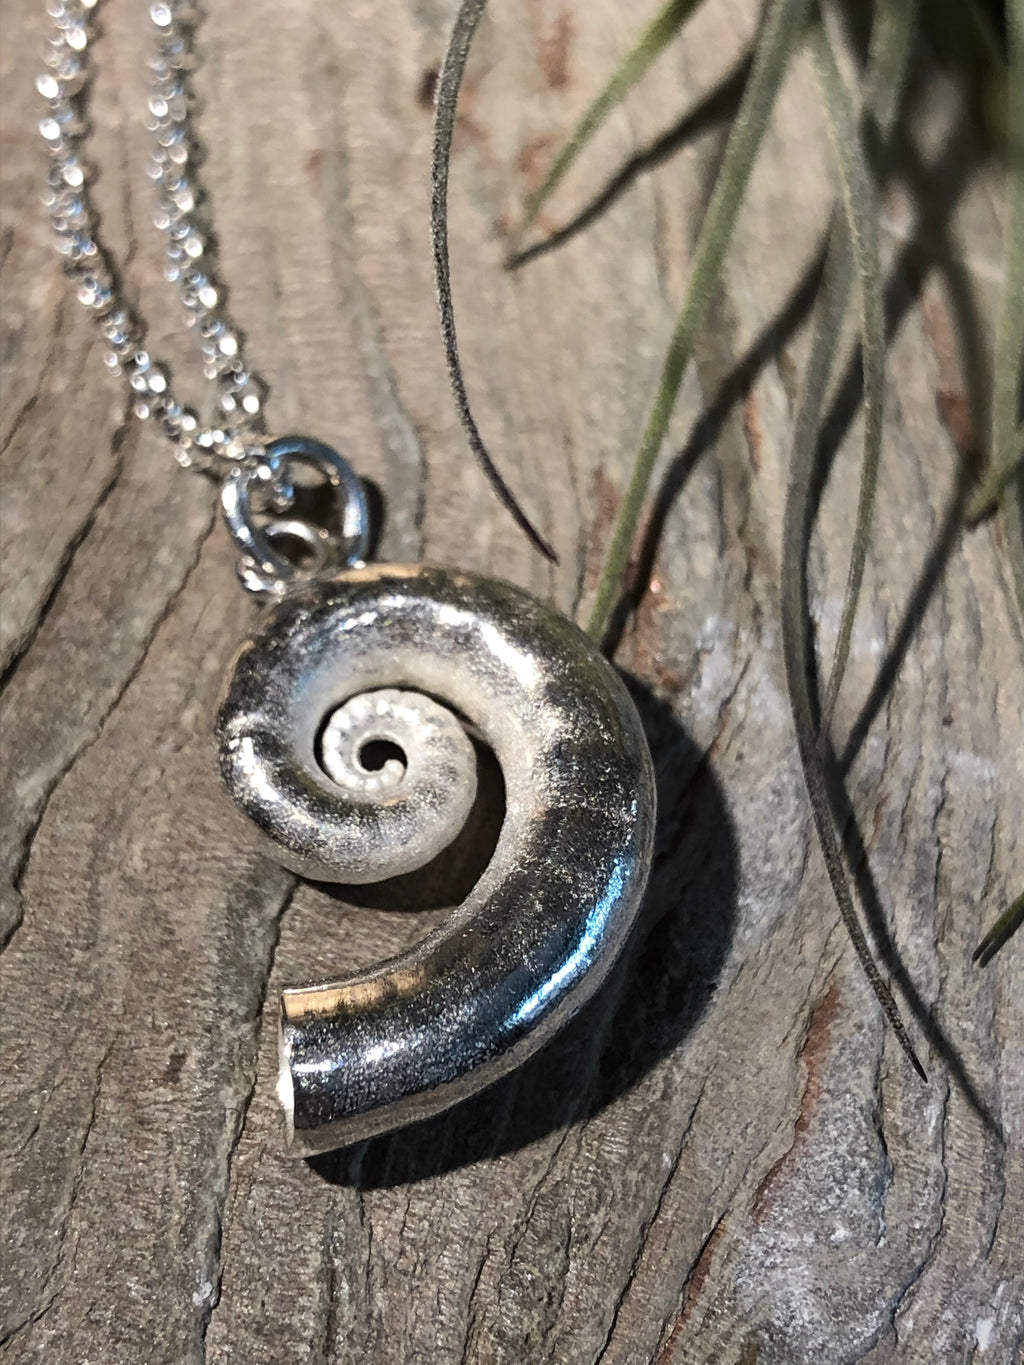 Chunky silver spiral shell necklace.